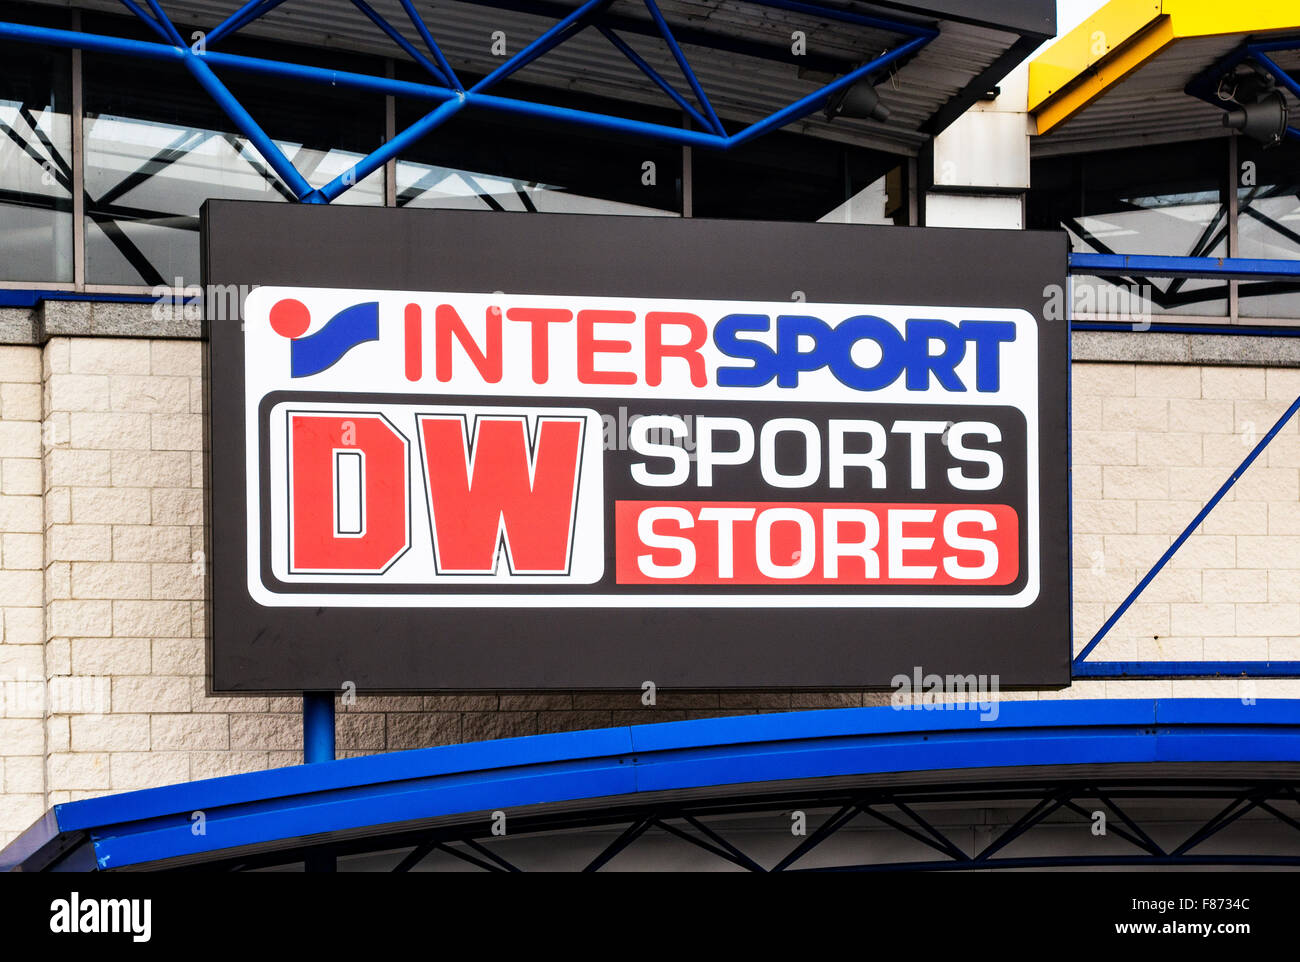 Intersport DW sports store sign Stock Photo